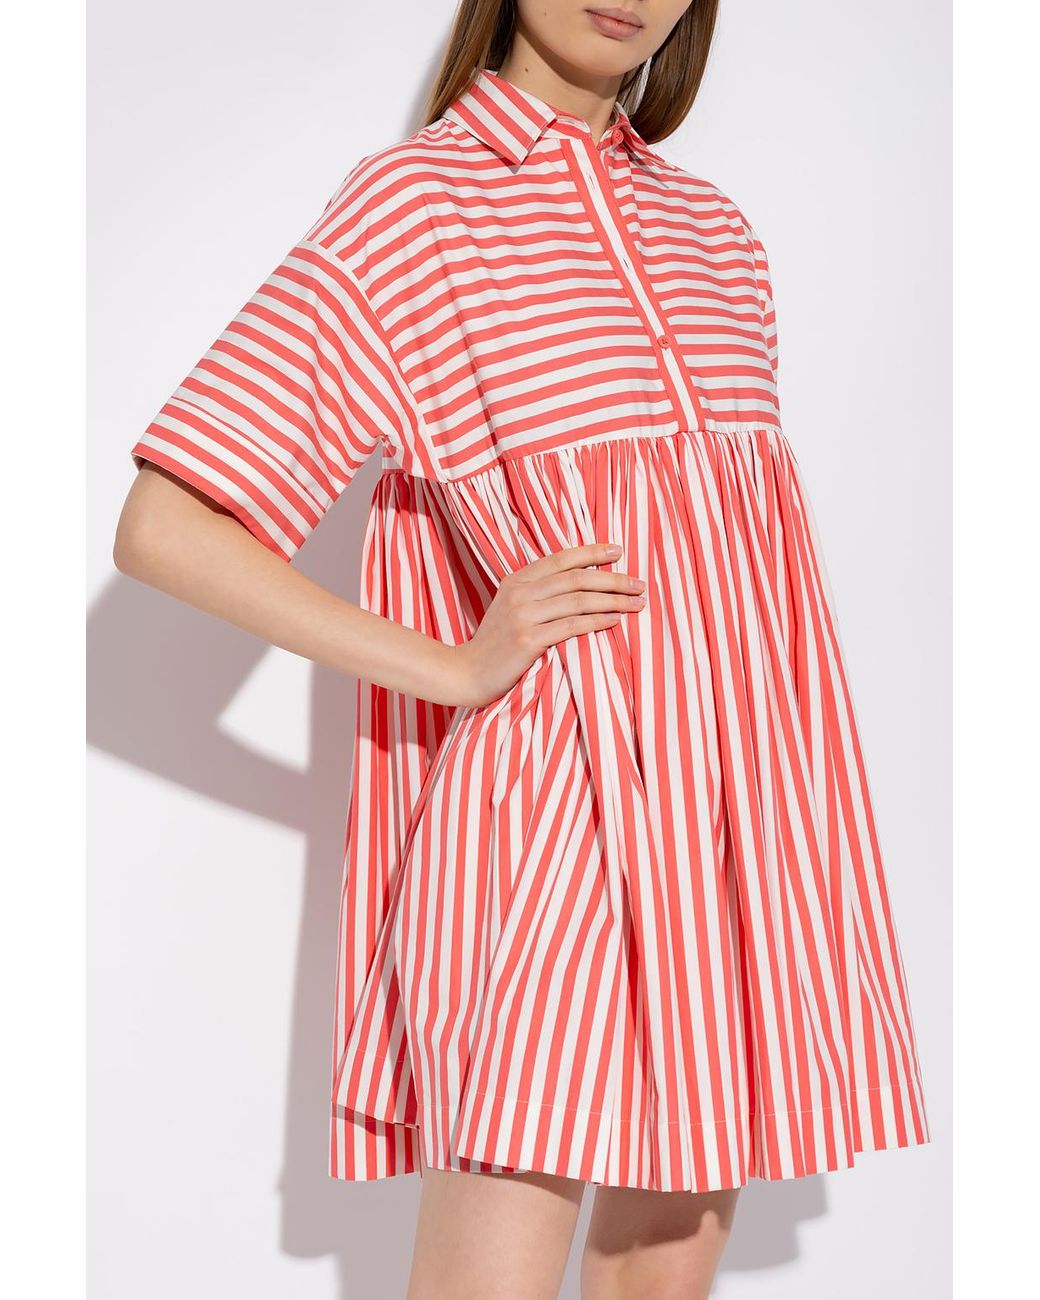 Kate Spade Cotton Striped Dress in Red | Lyst